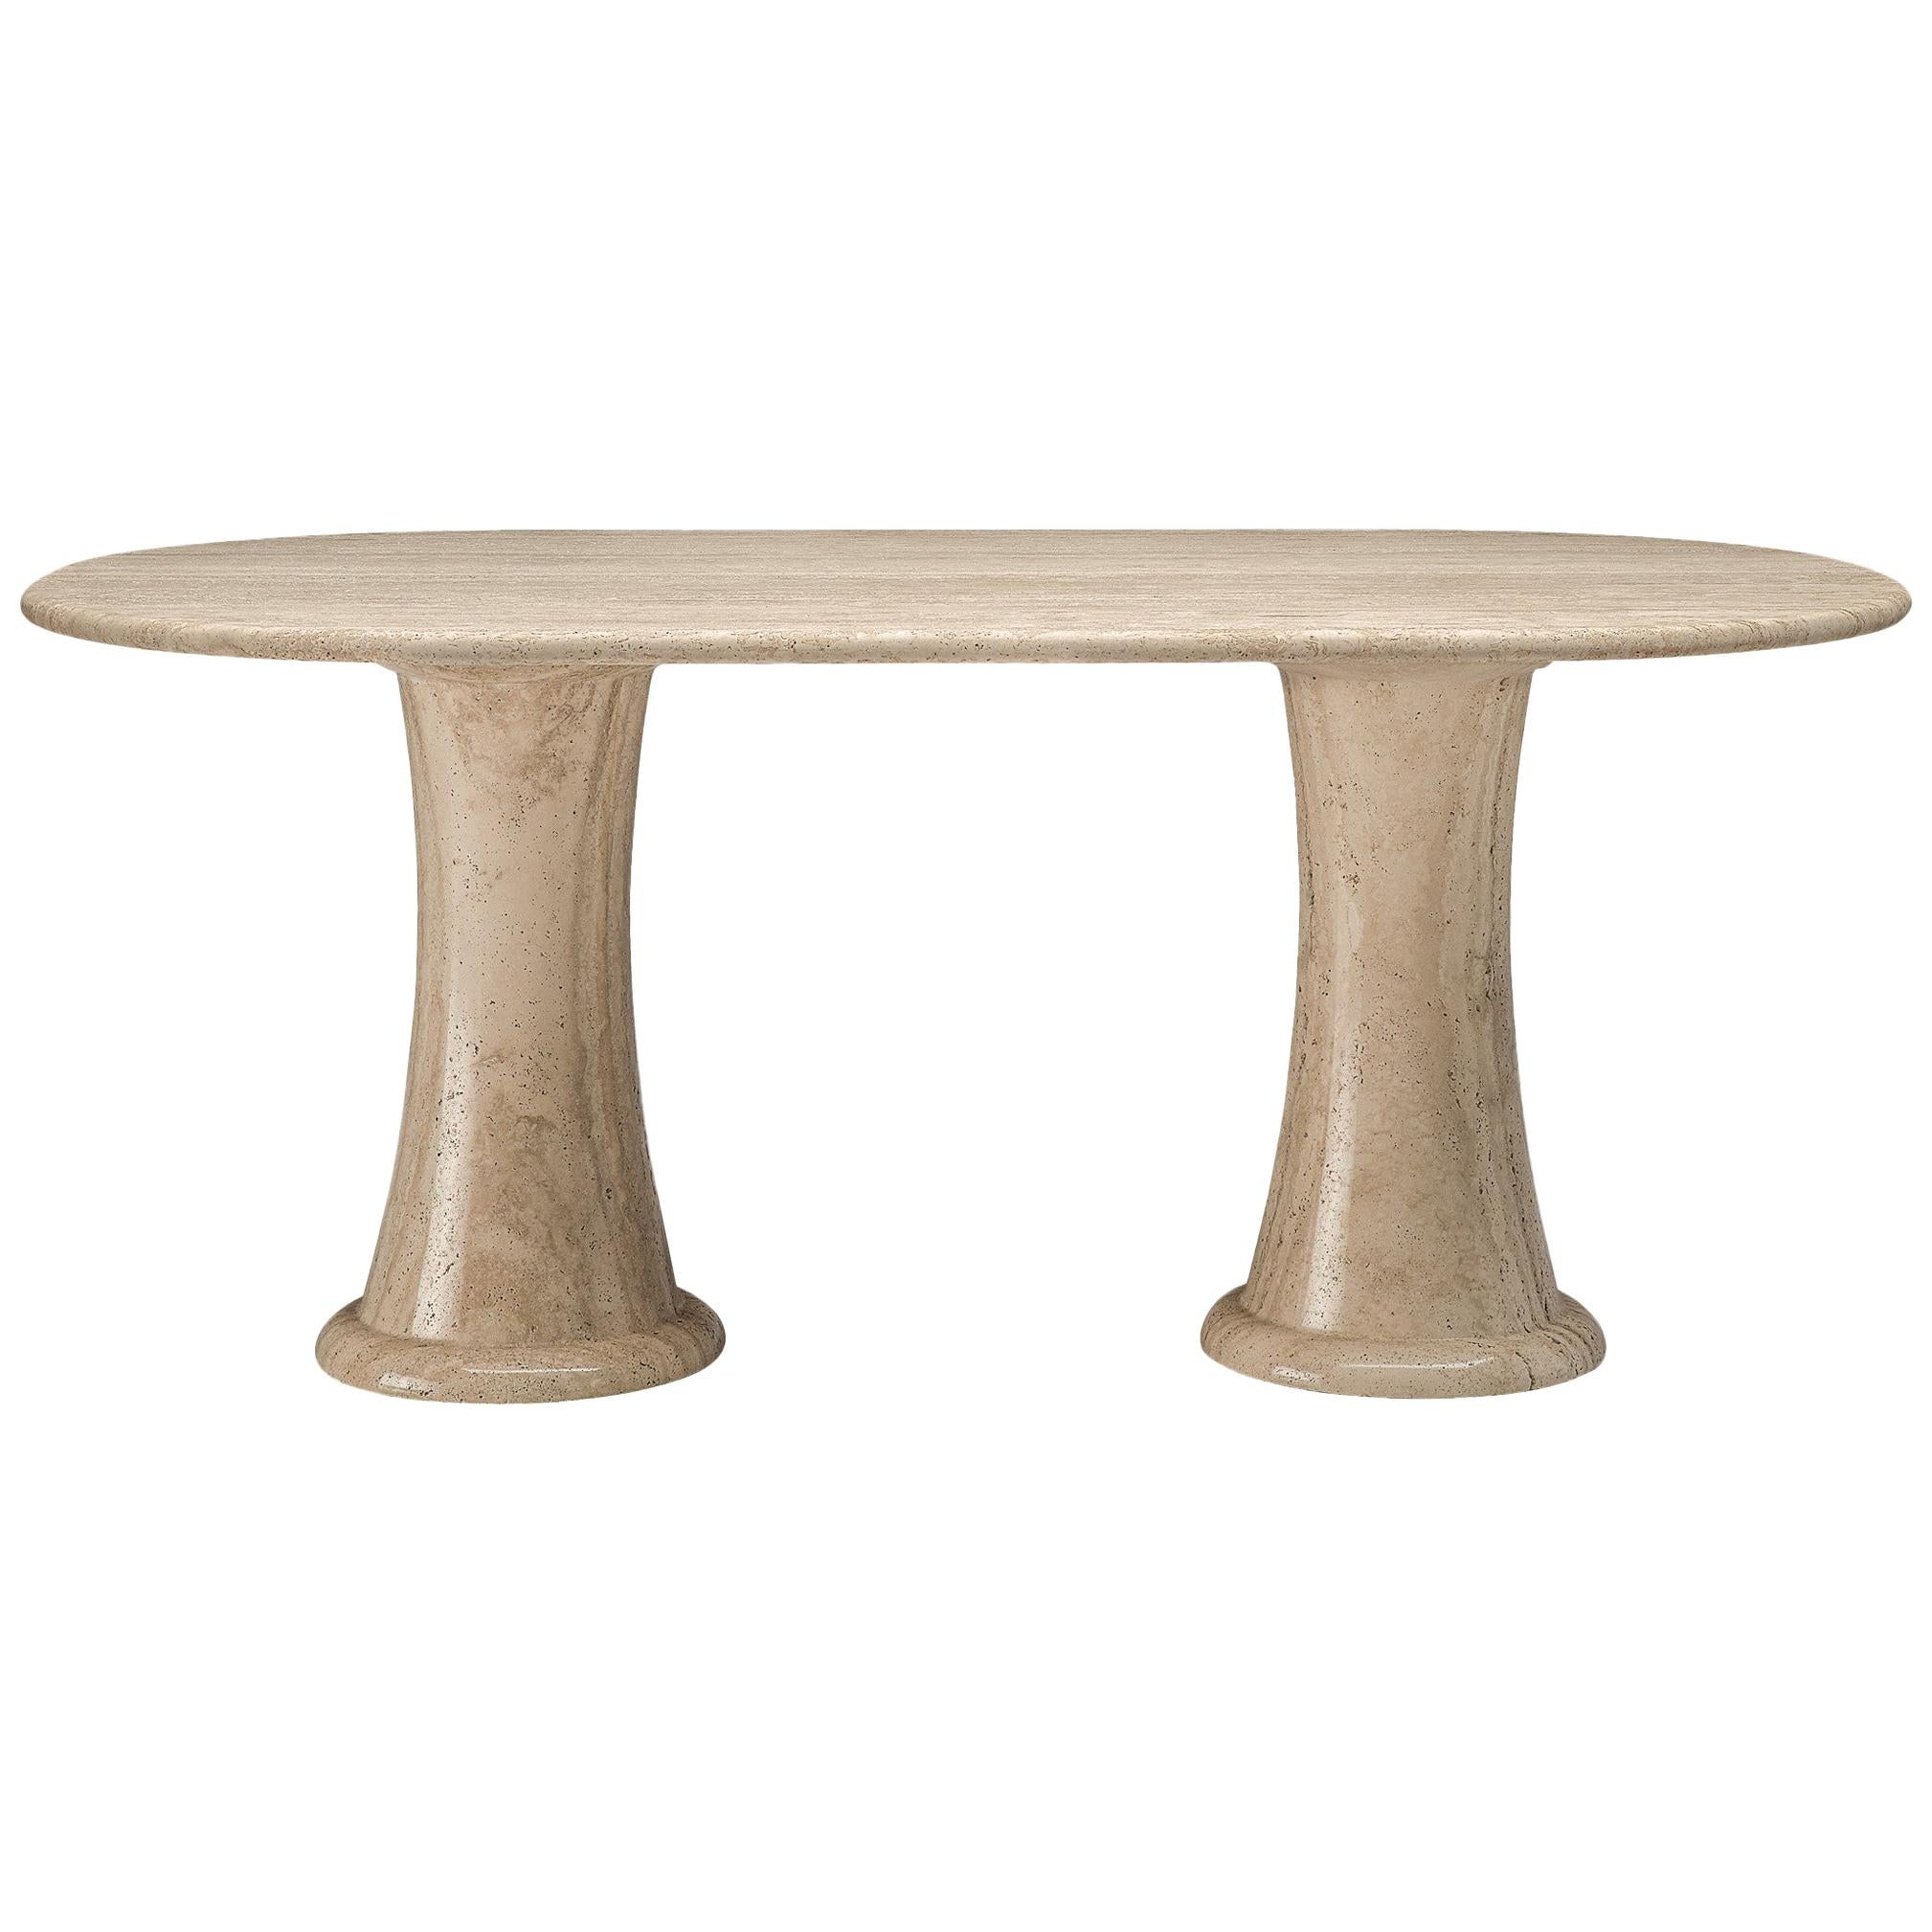 Italian Table with Oval top in Travertine